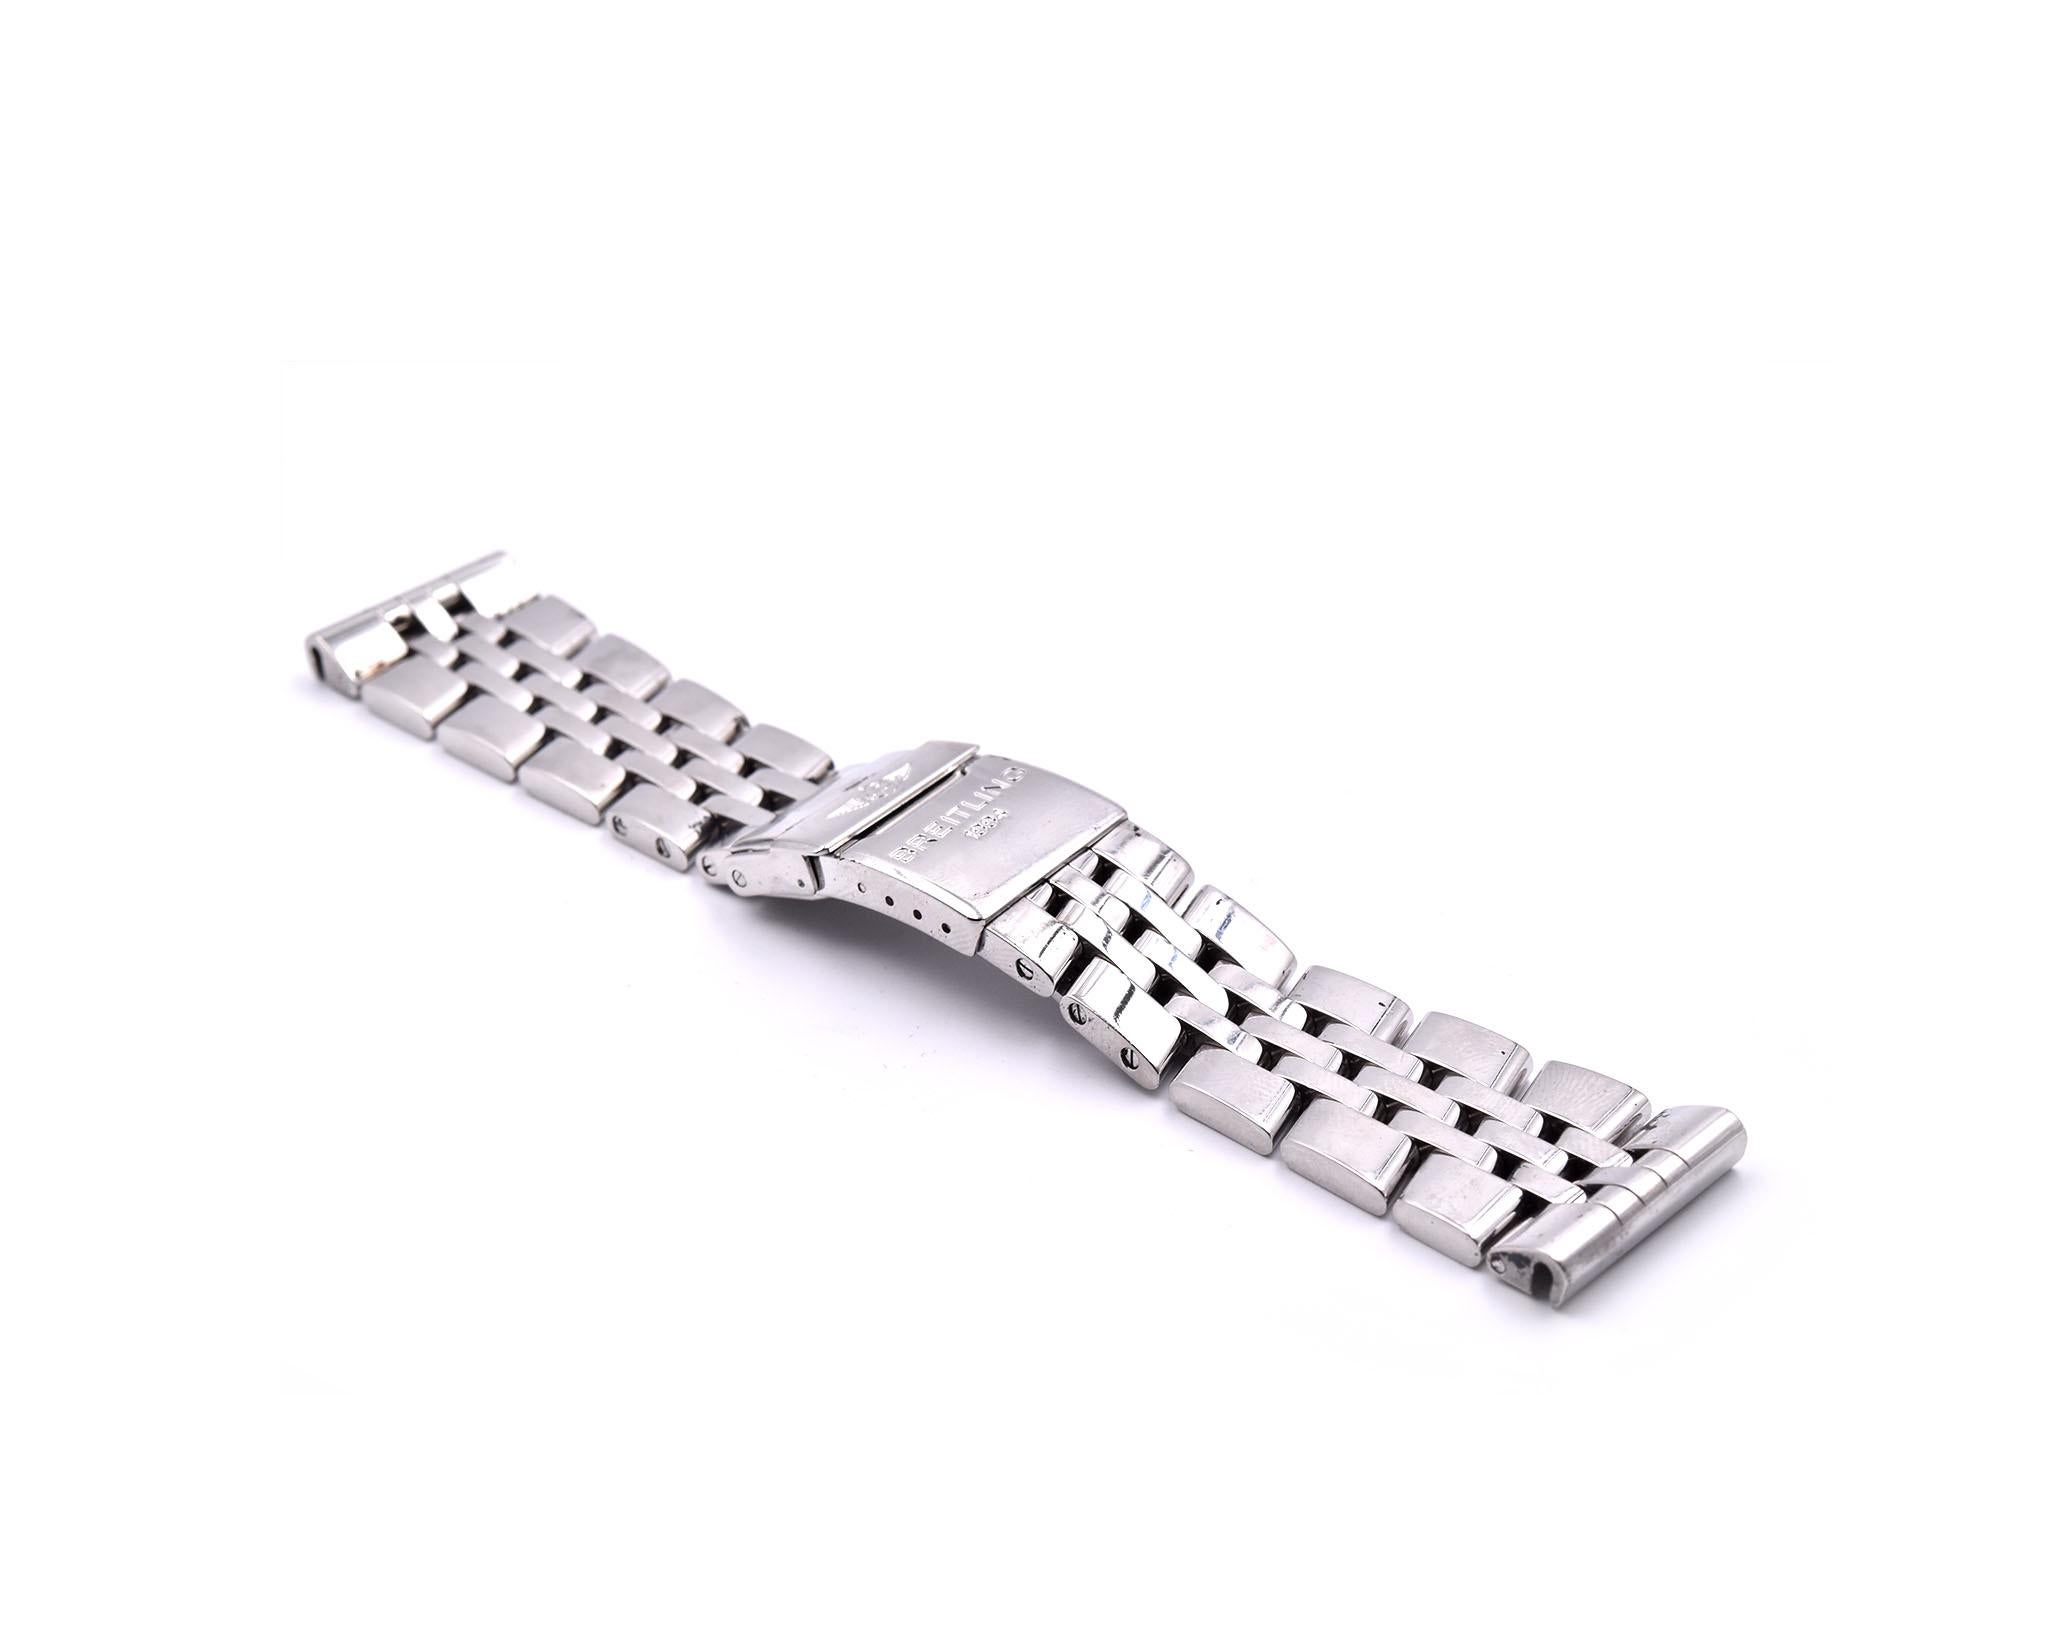 Band: Breitling steel bracelet 970A for Bentley
Reference #: 970A
